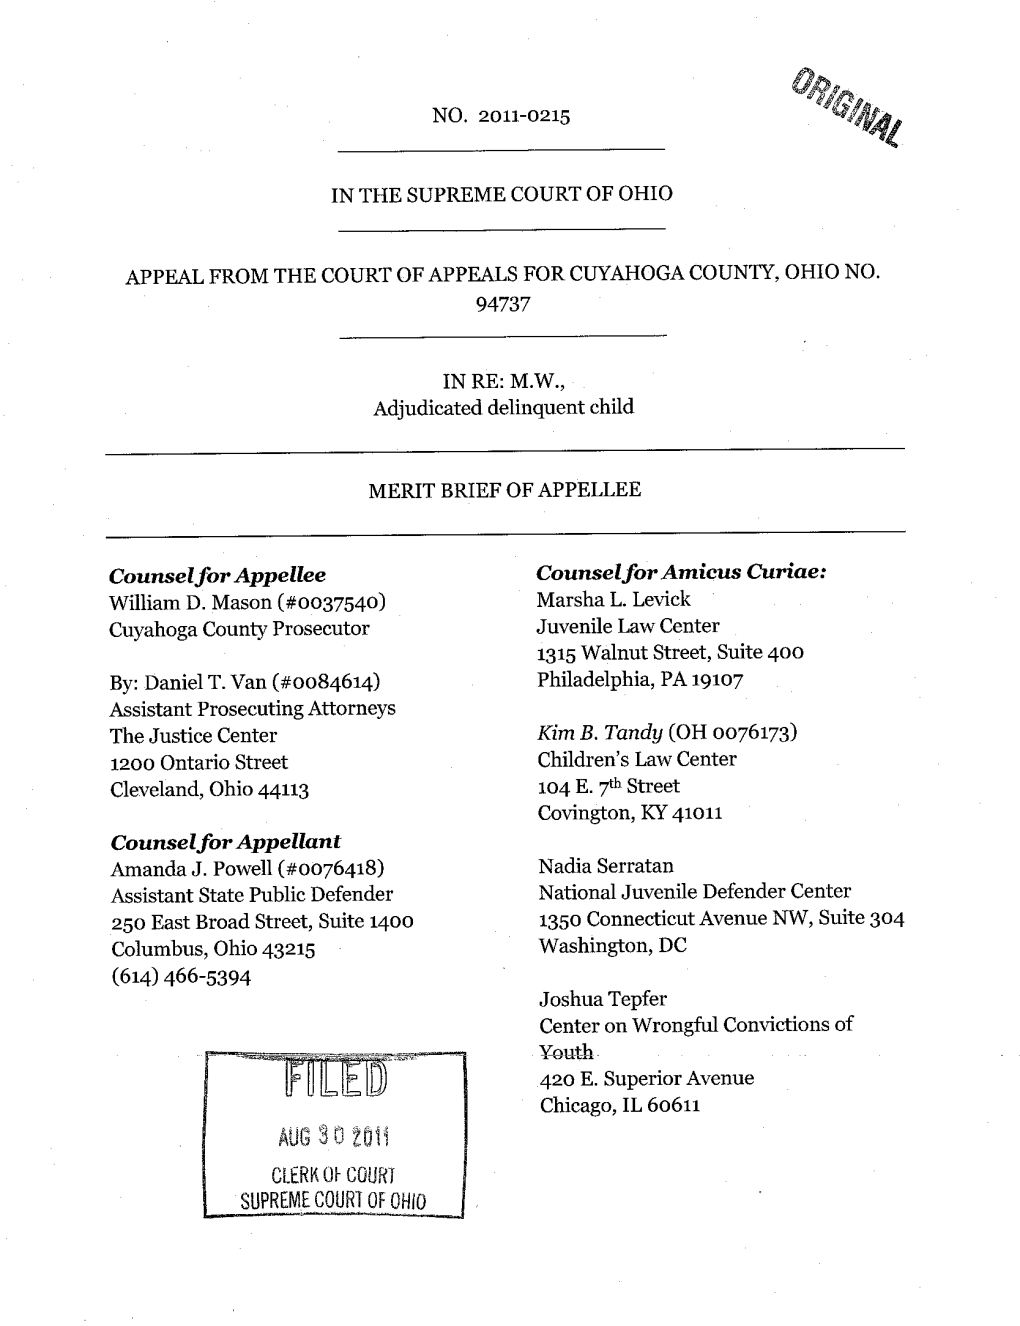 AUG 3 0 Toli CLERK of Cgilrt SUPREME COURT of OHI TABLE of CONTENTS